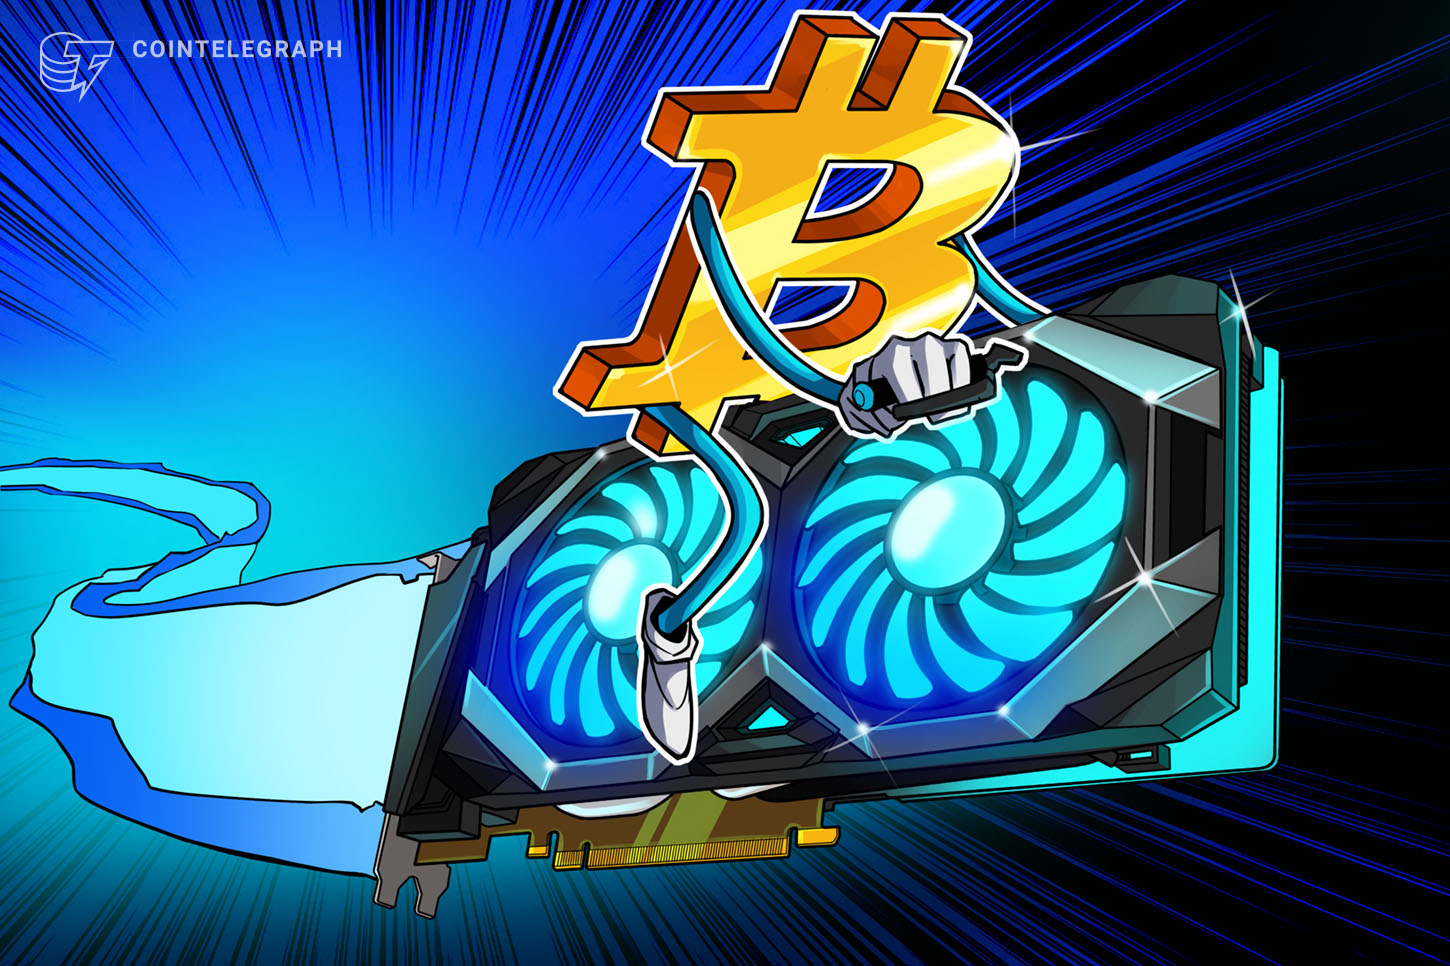 Bitcoin miner Northern Data yees $16B IPO for US cloud and mining units